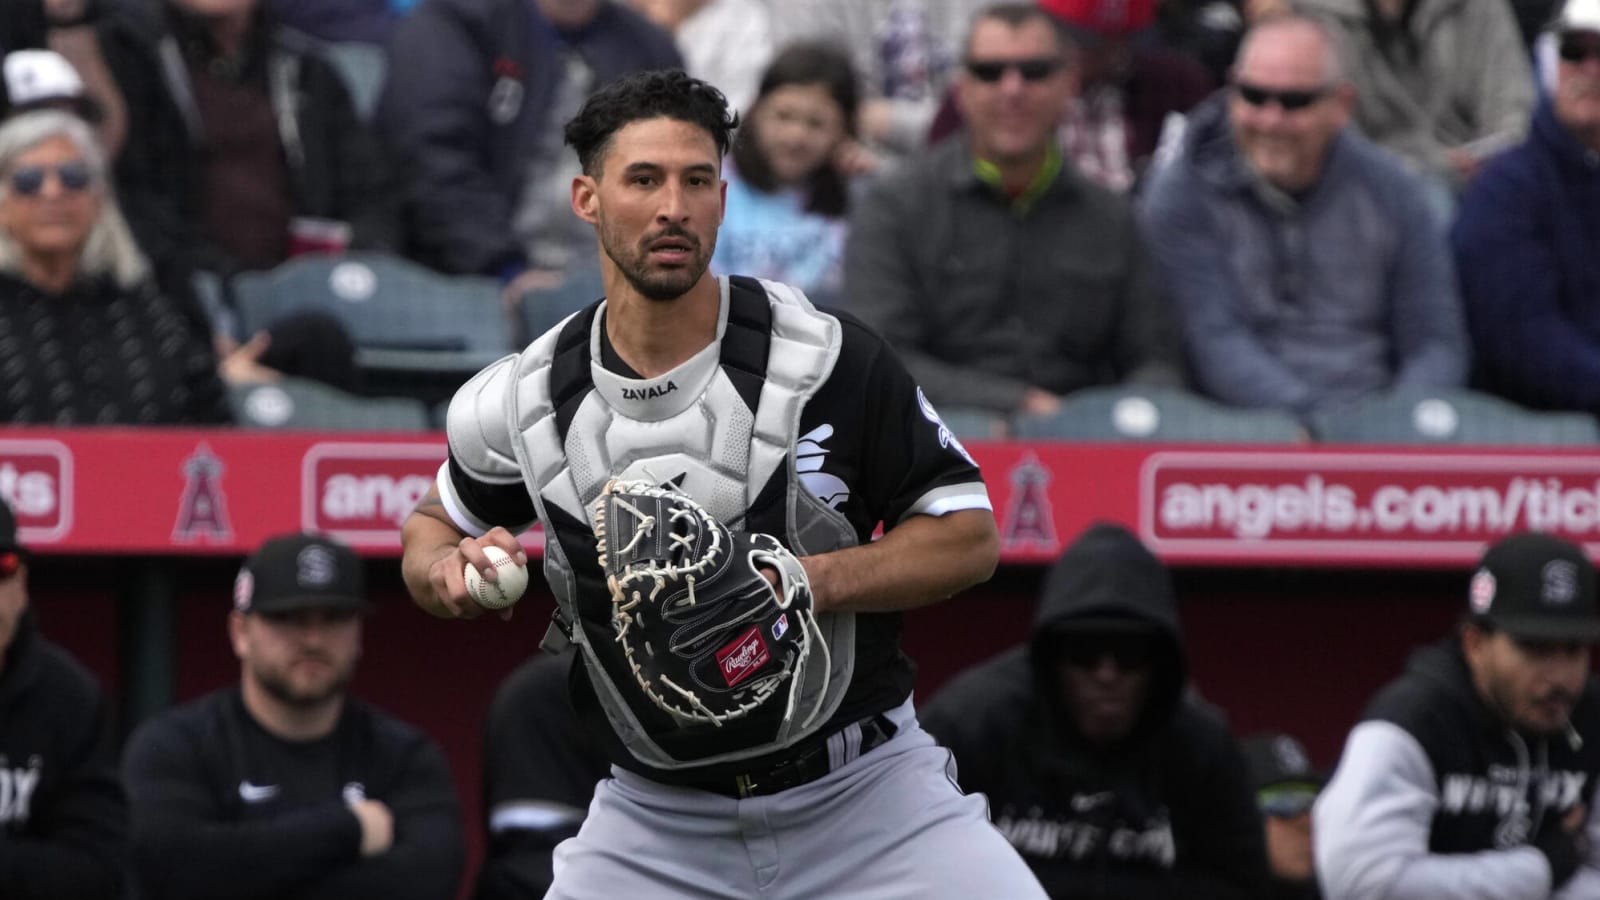 White Sox catcher frustrated by peskiness of Blue Jays